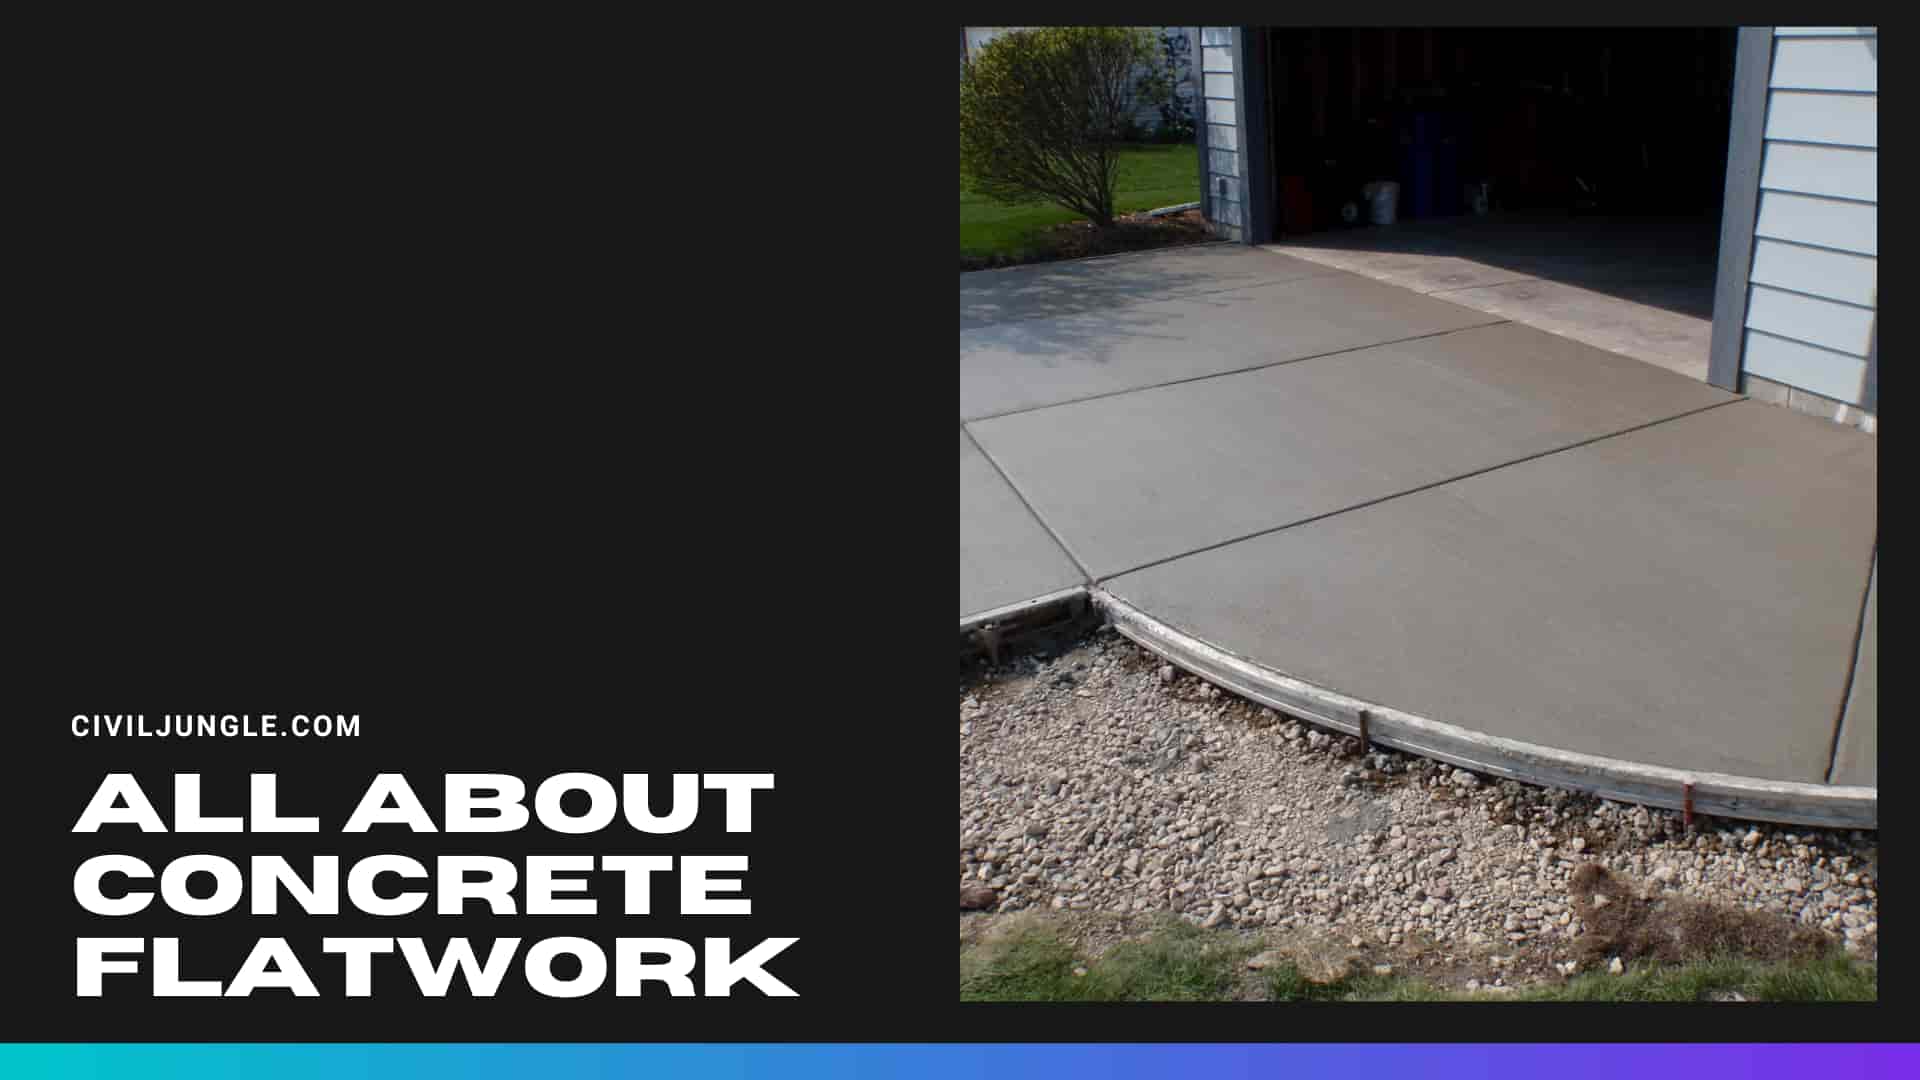 All About Concrete Flatwork